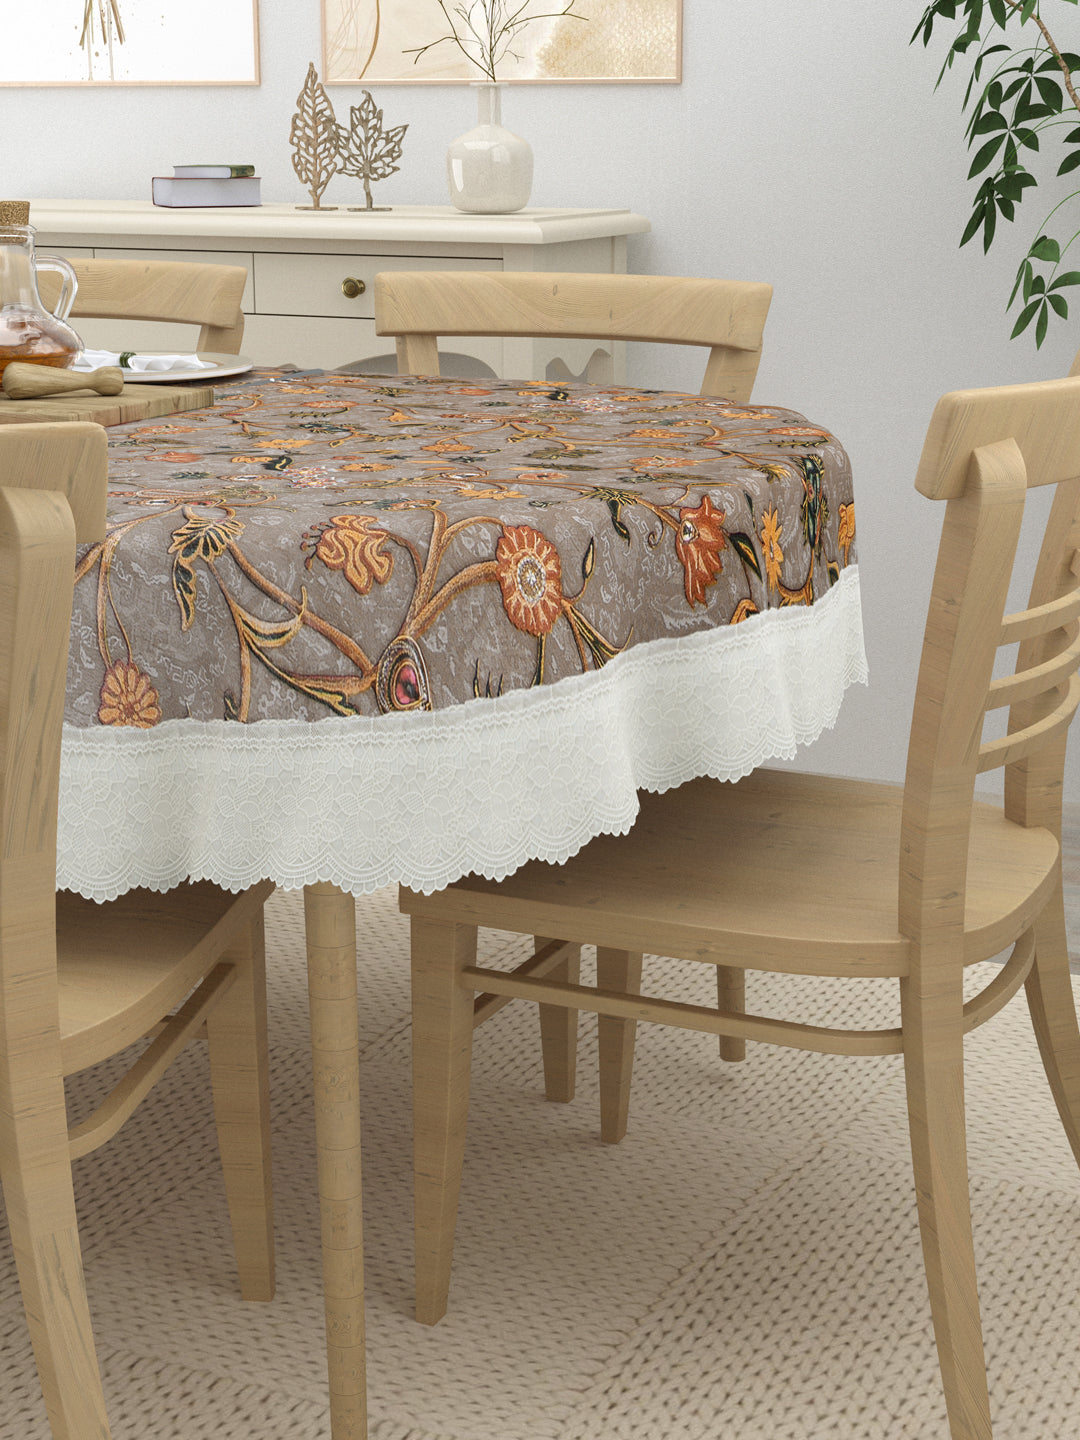 6 Seater Oval Dining Table Cover; 60x90 Inches; Material - PVC; Anti Slip; Golden Yellow Flowers